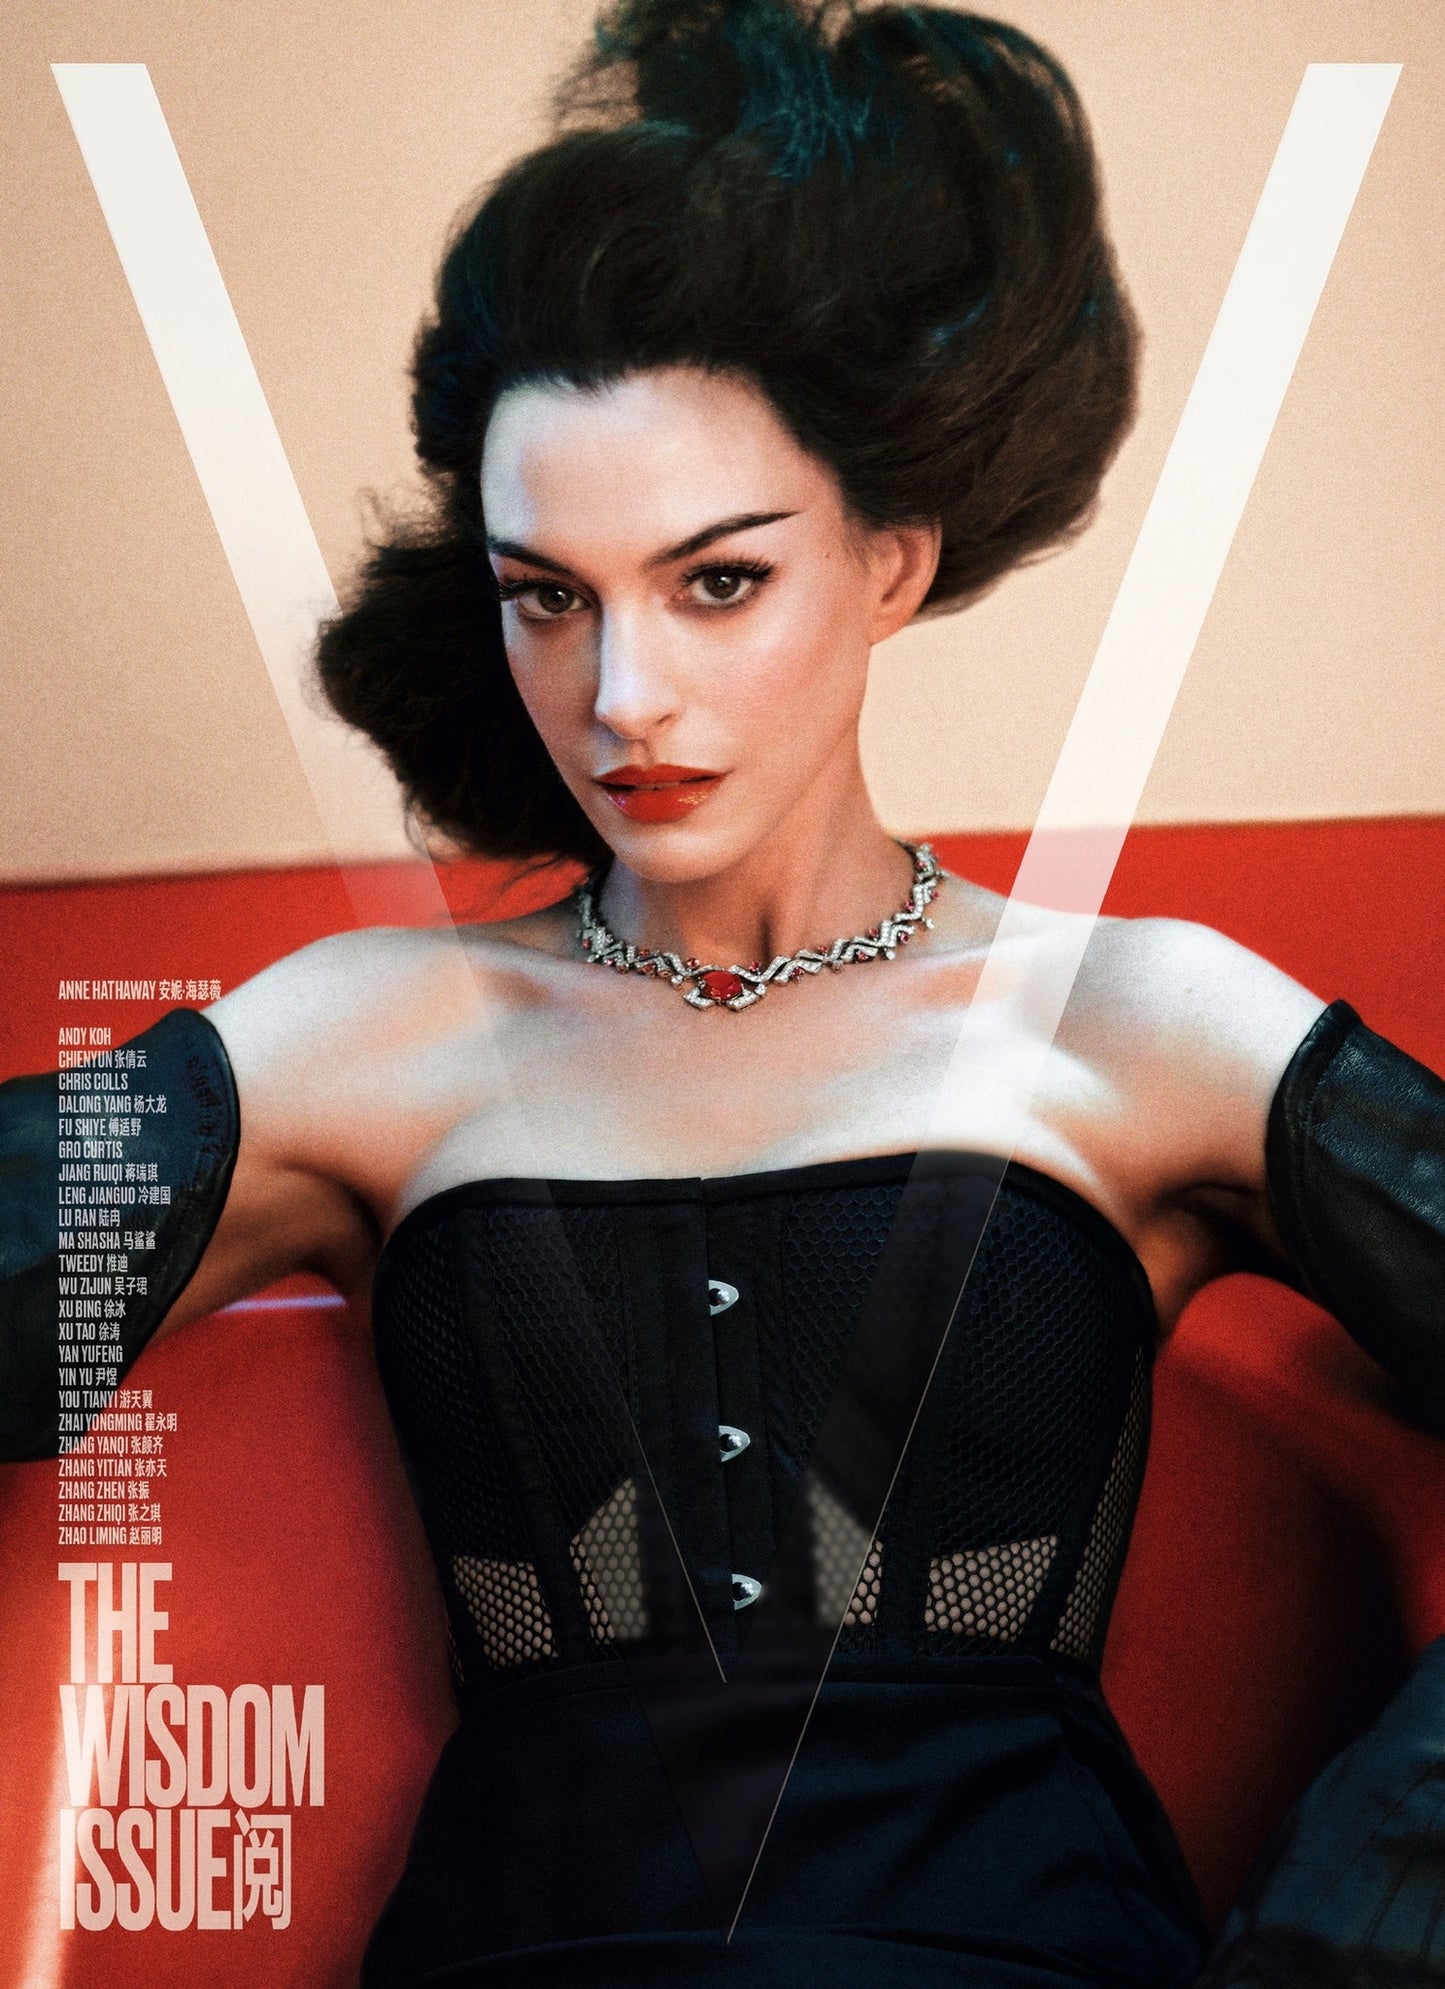 Anne Hathaway in Corsettery corset for V magazine cover